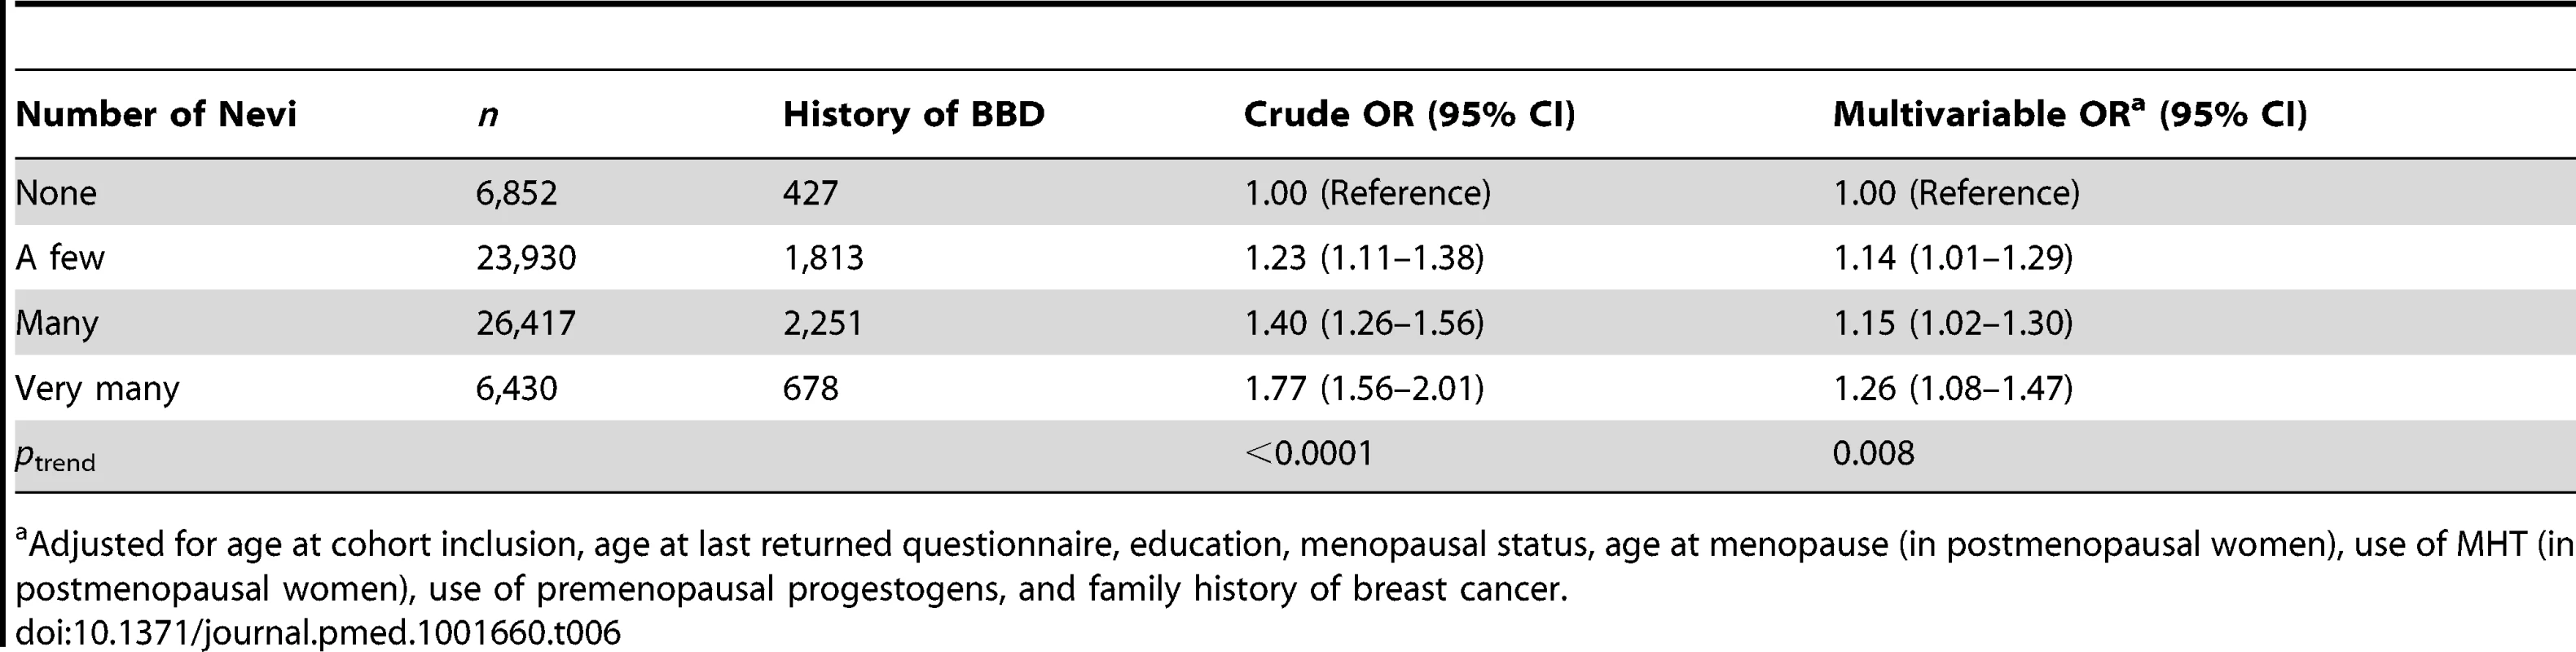 Odds ratios and 95% confidence intervals for number of nevi in relation to history of benign breast disease, E3N cohort.